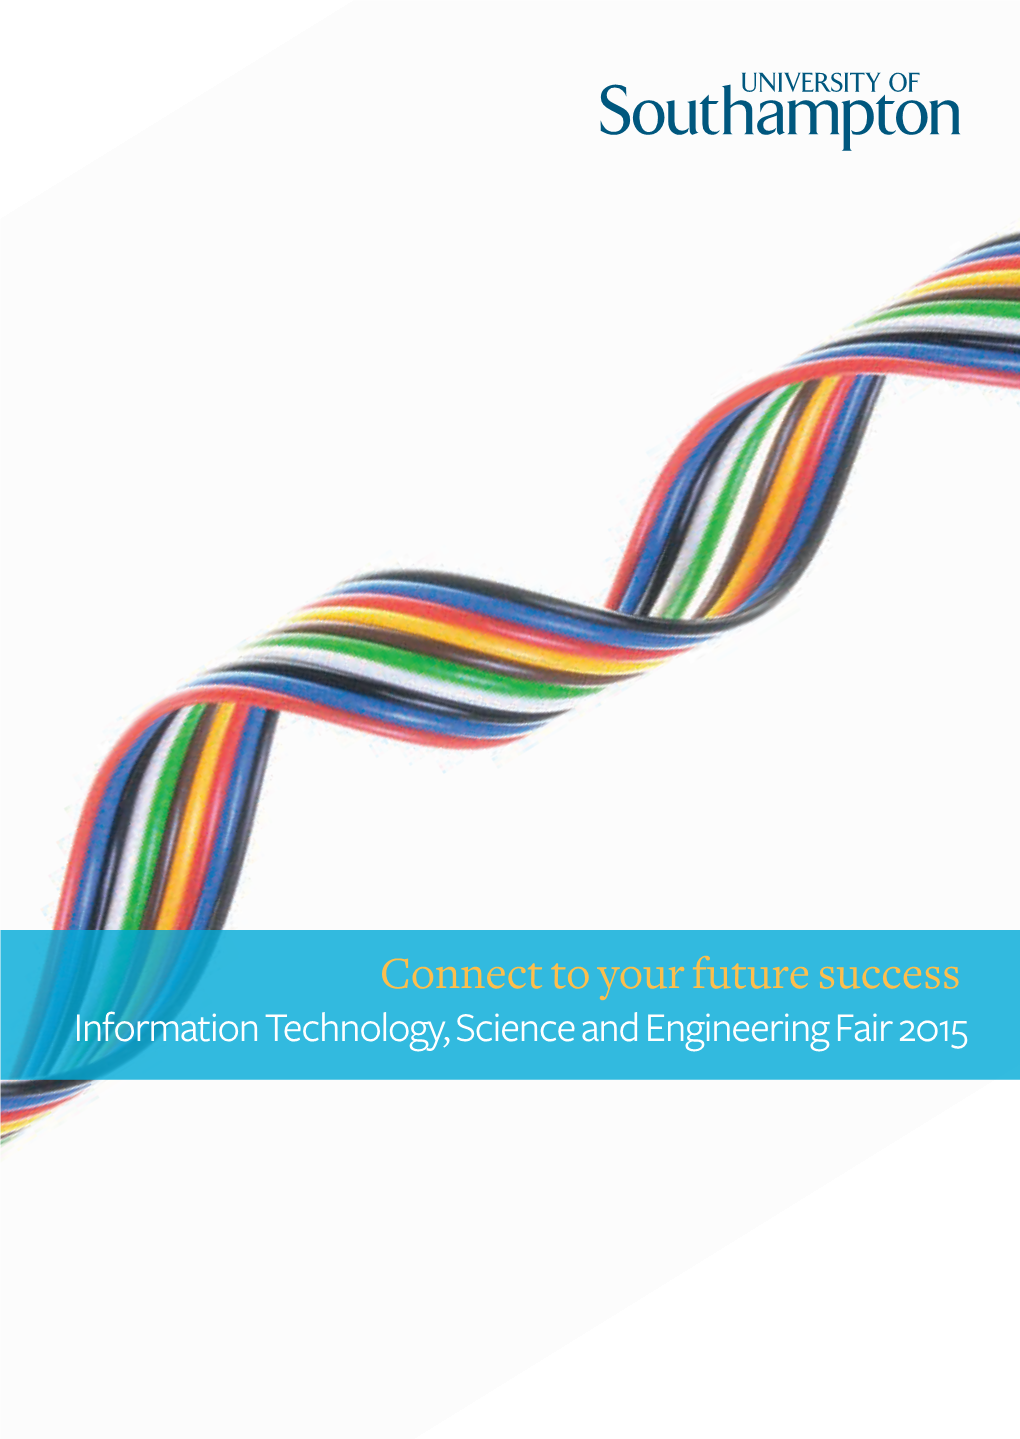 Connect to Your Future Success Information Technology, Science and Engineering Fair 2015 Contents